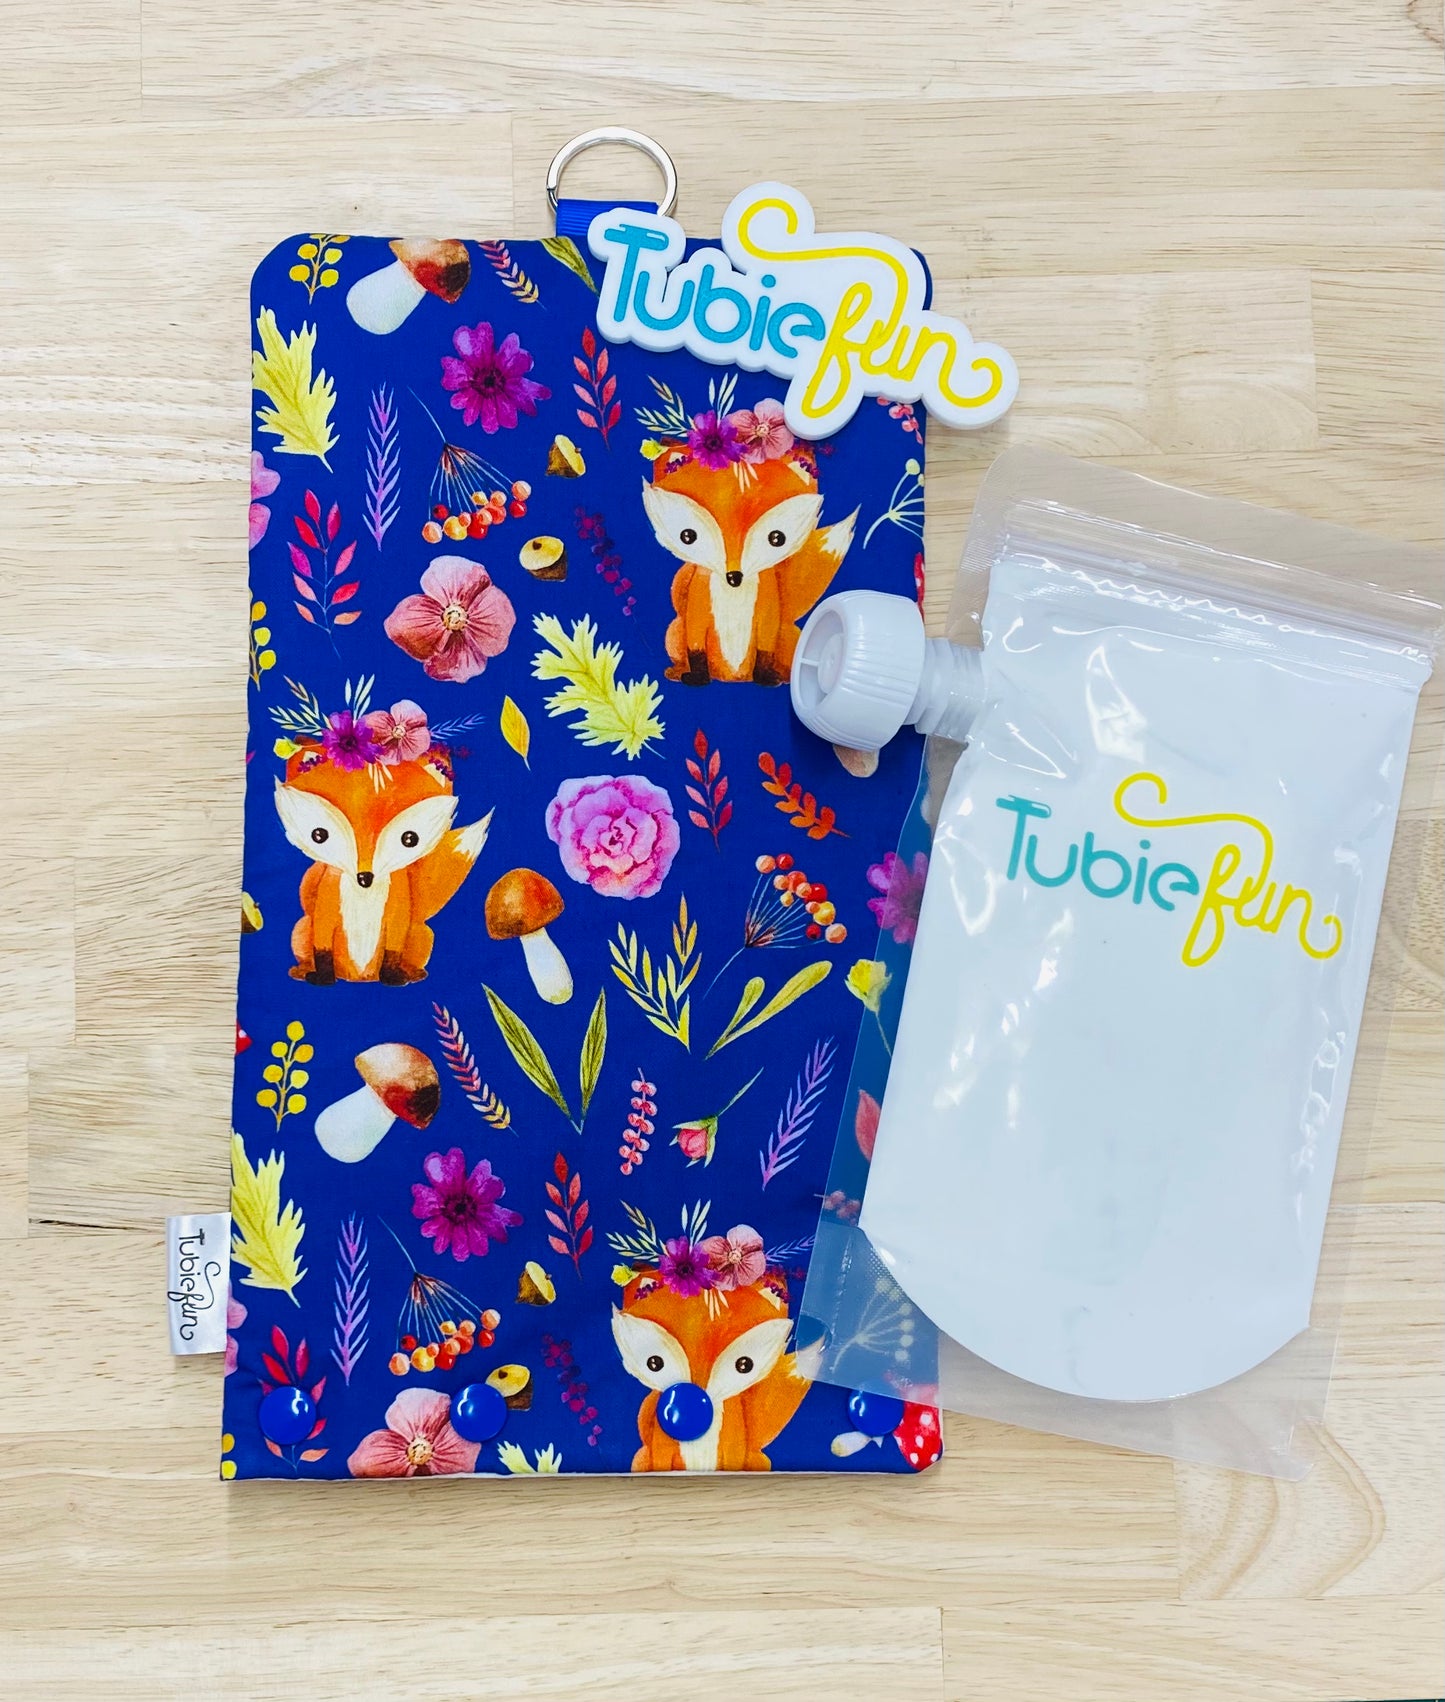 NEW Insulated Milk Bag Suitable for Tubie Fun 500ml Reusable Pouches - Fox on Blues